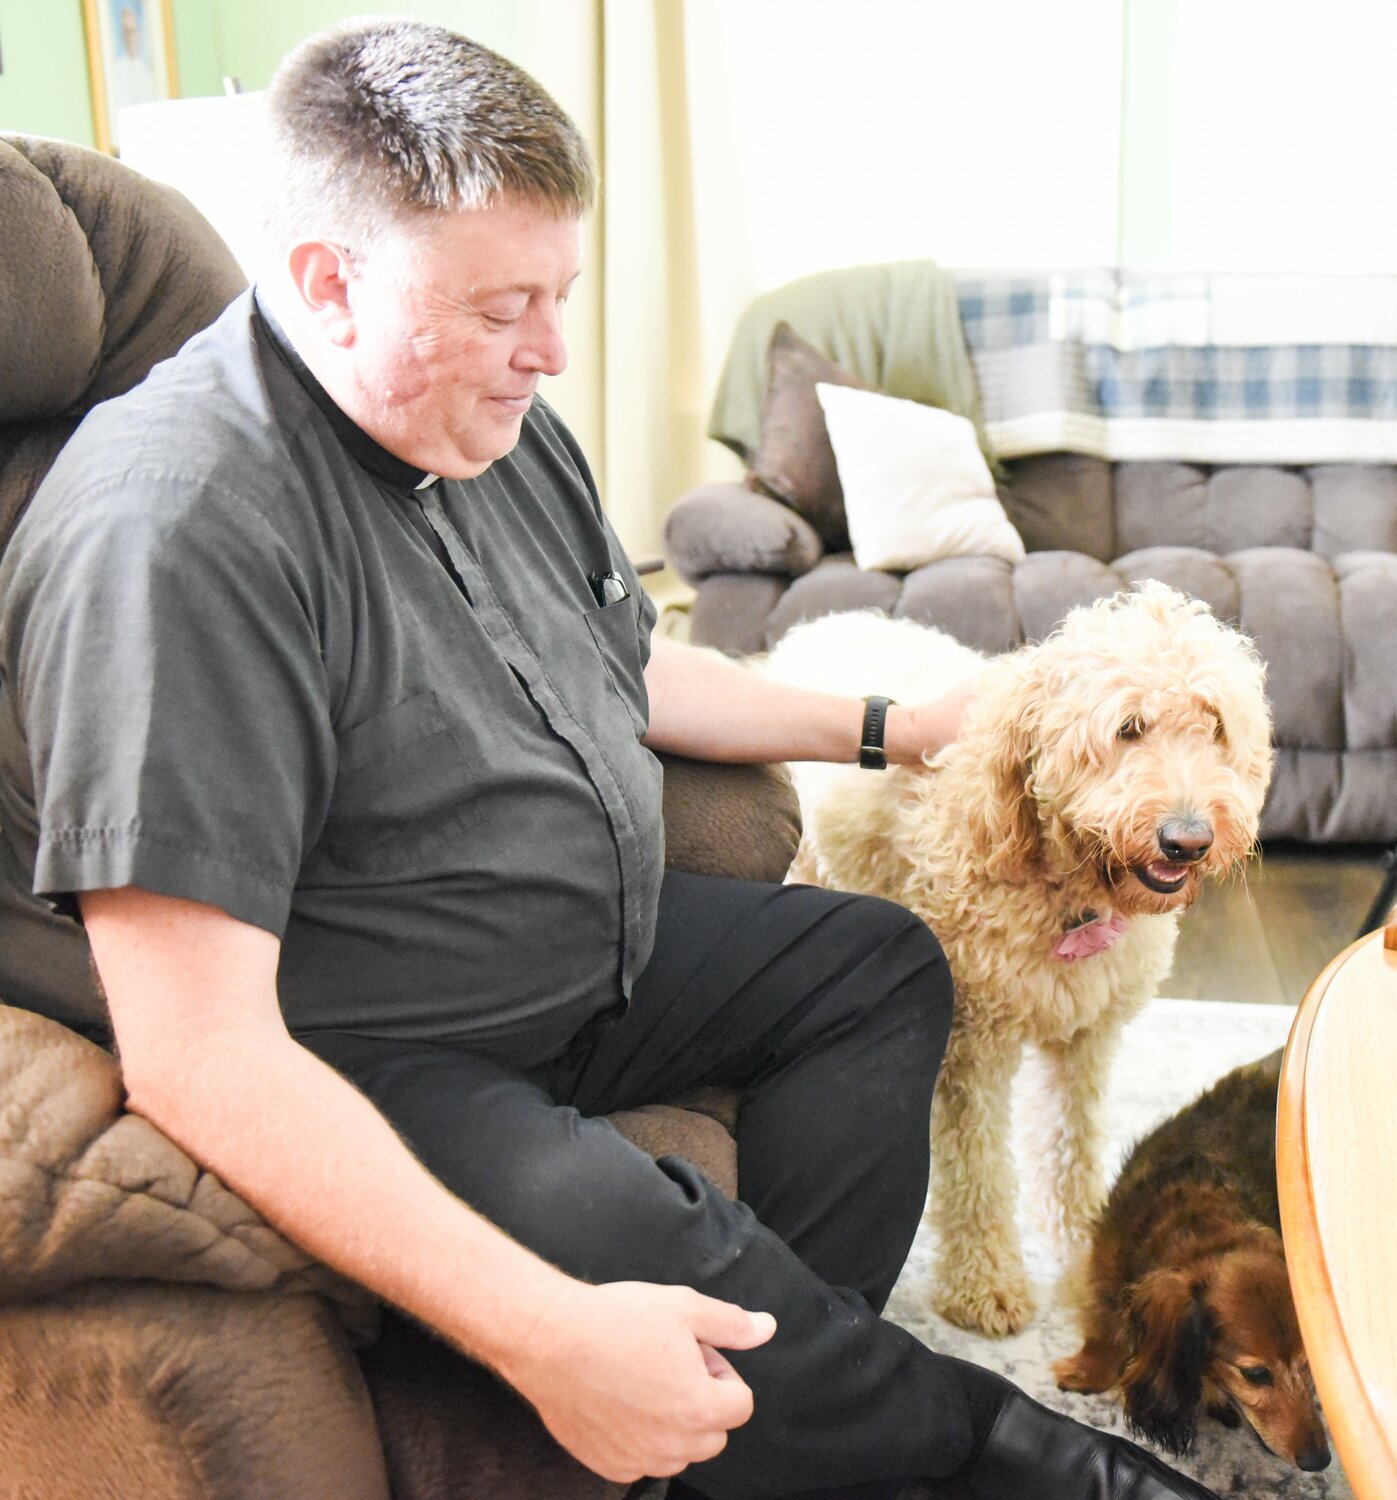 Father William Peckman, pastor of Immaculate Conception Parish in Macon, St. Mary Parish in Shelbina and the Mission of Sacred Heart in Bevier, entertains Buddy, a wire-haired Dachshund, and Molly, a Goldendoodle, in the St. Mary Parish Rectory.